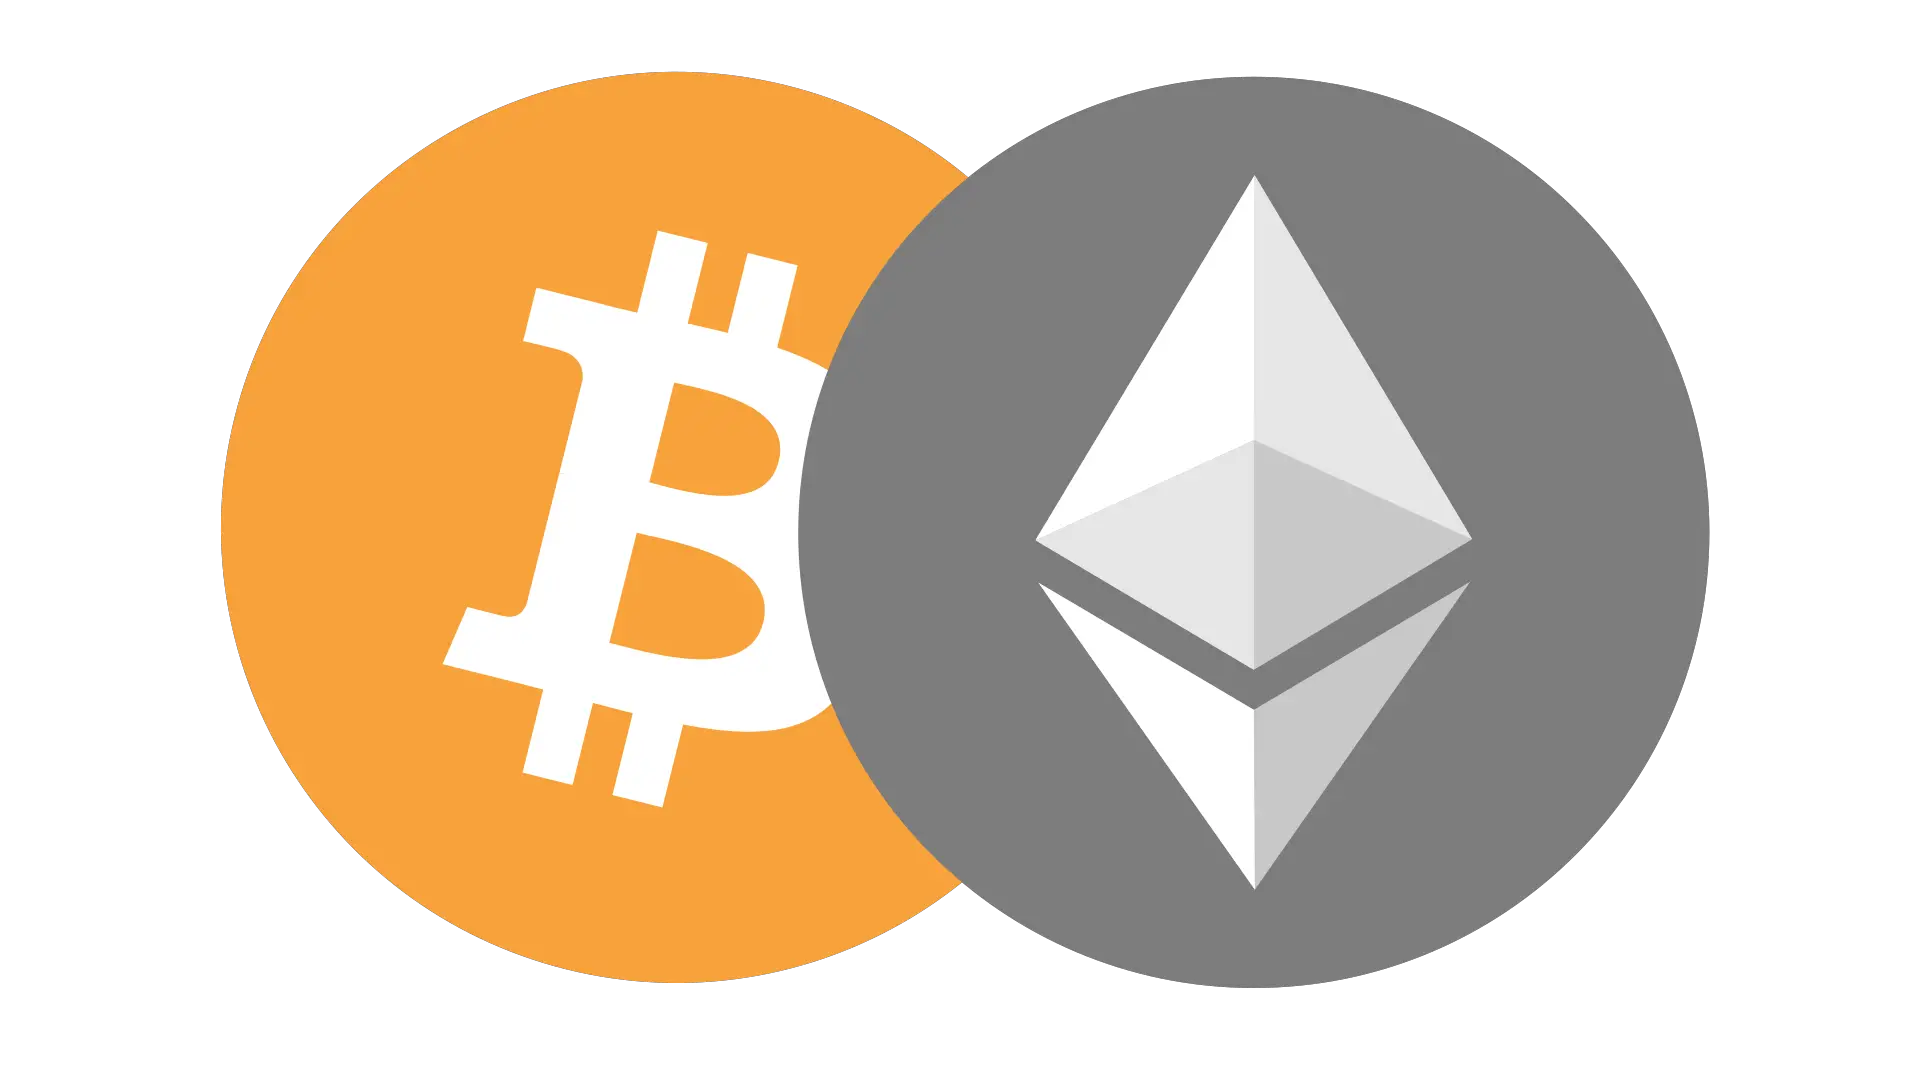 Ethereum 2.0 and Beyond